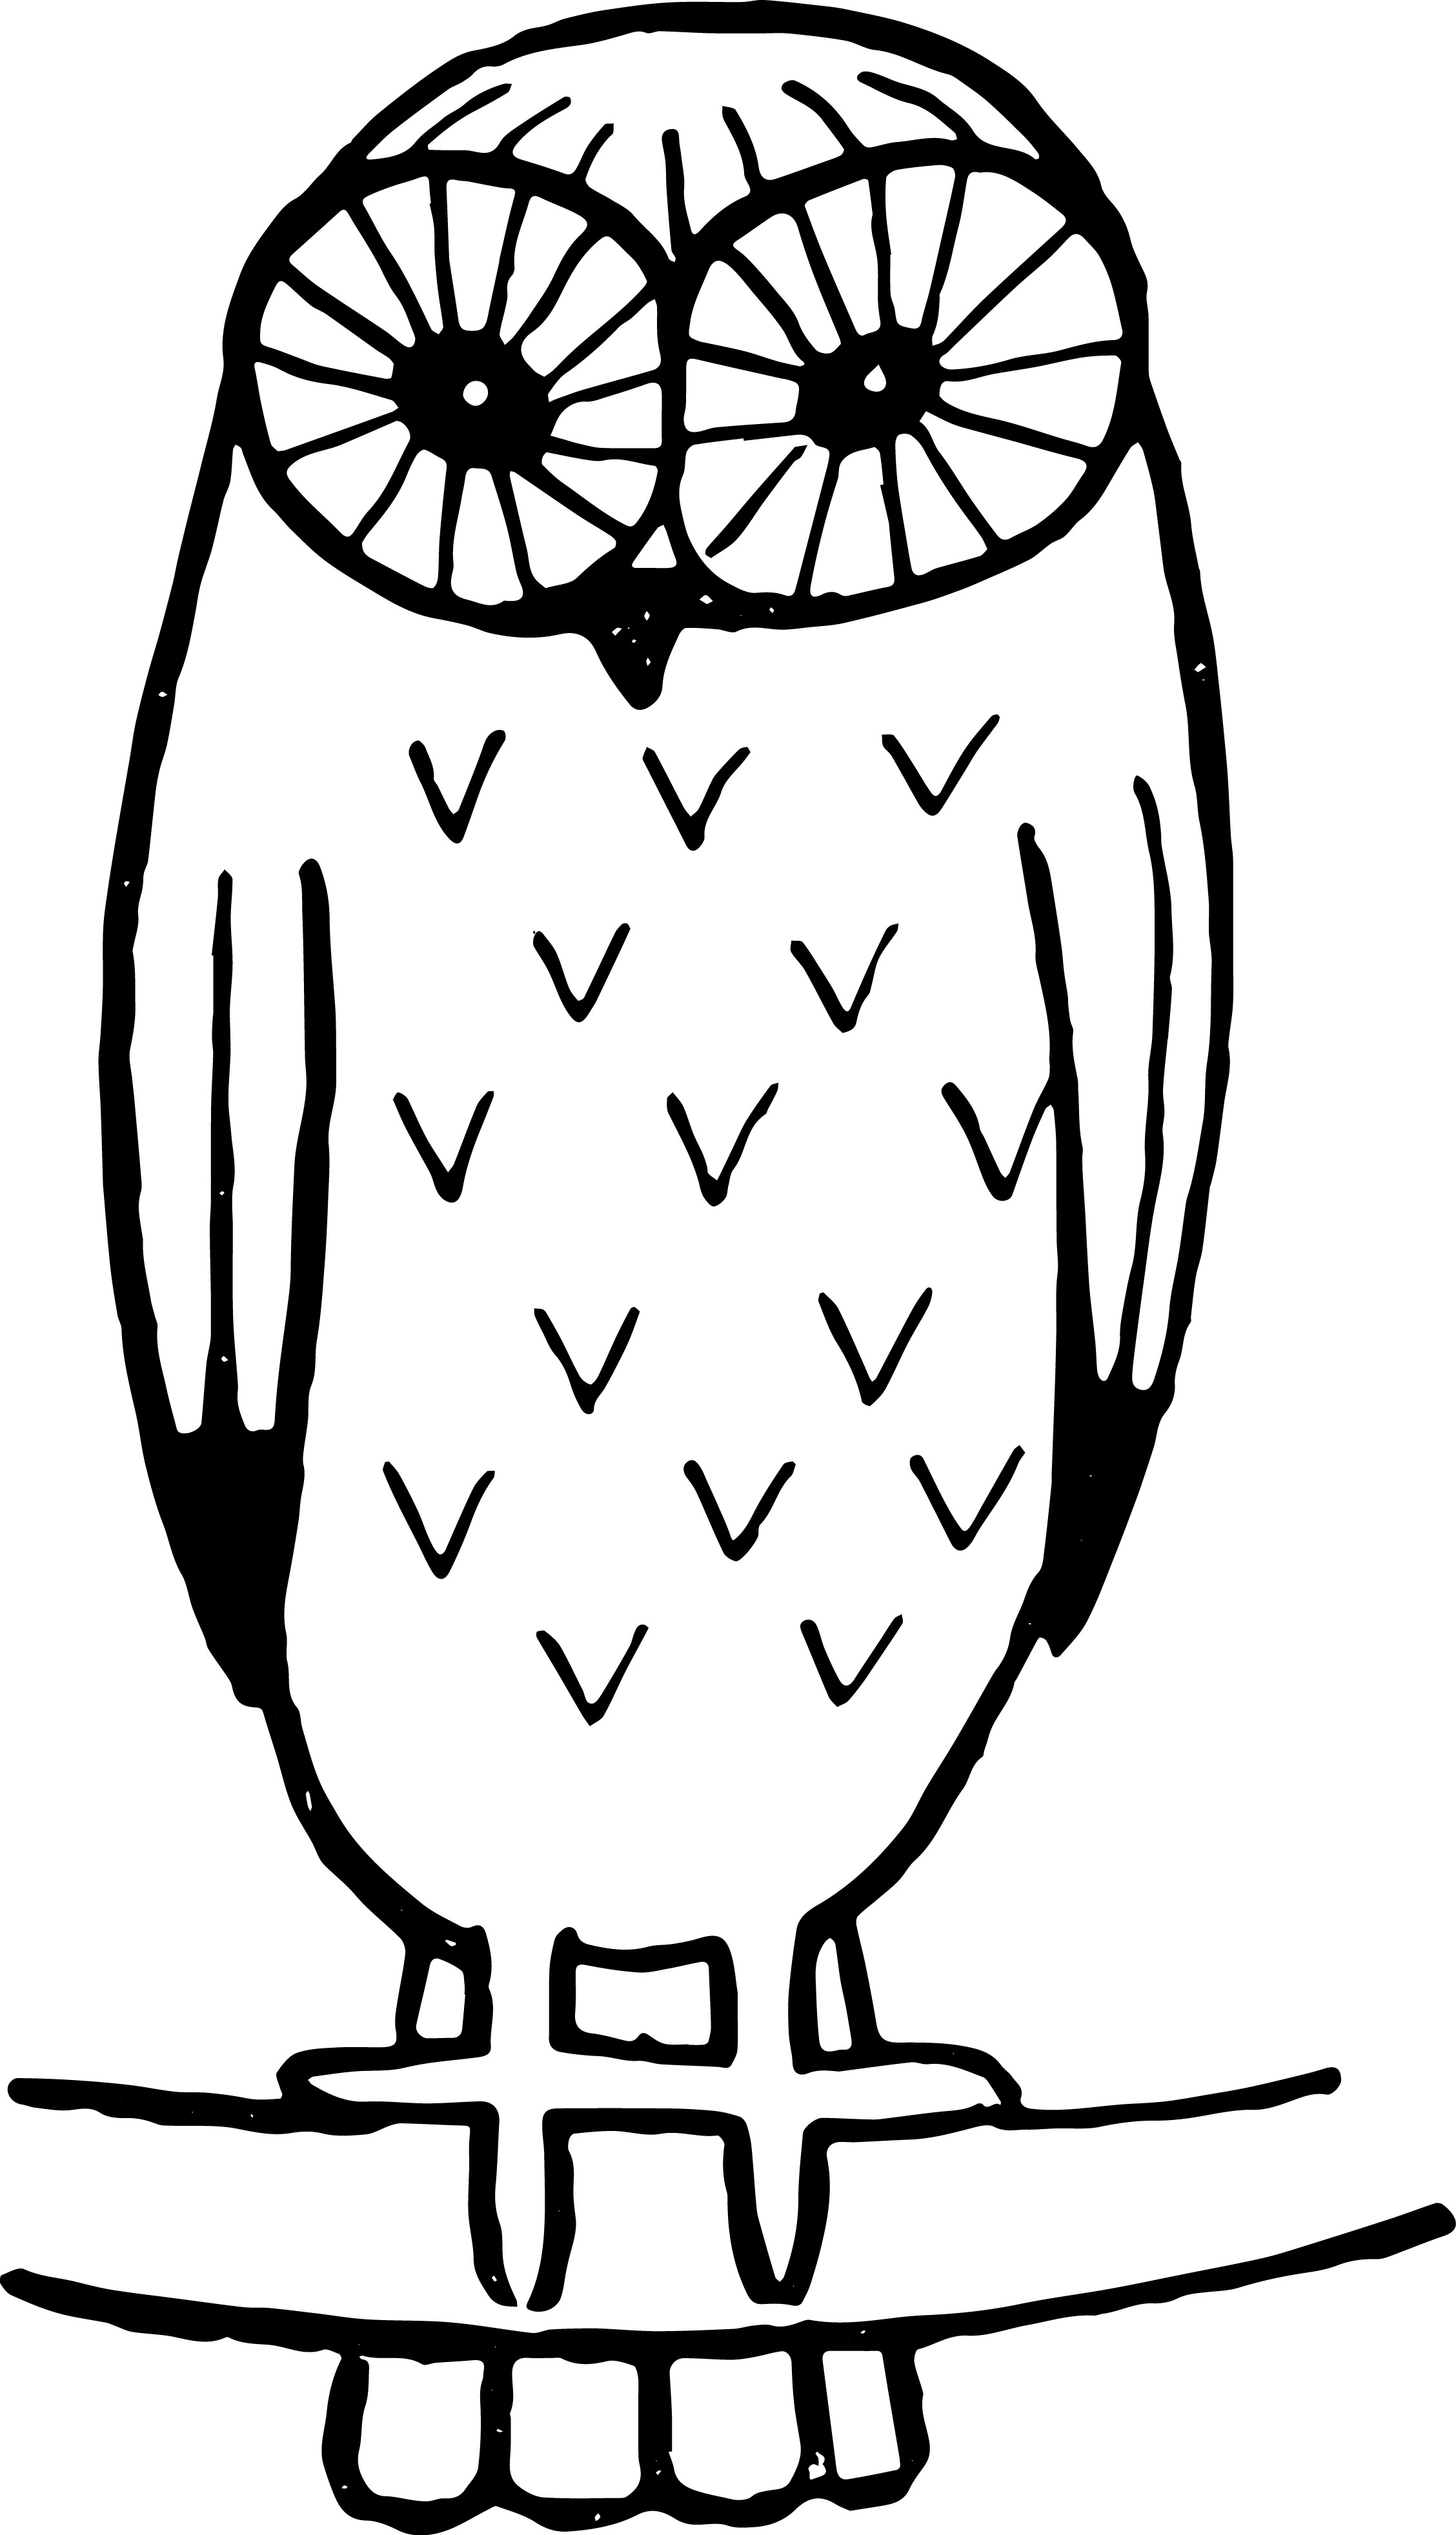 Free Clip Art Image - Vintage Barn Owl | Oh So Nifty Vintage Graphics